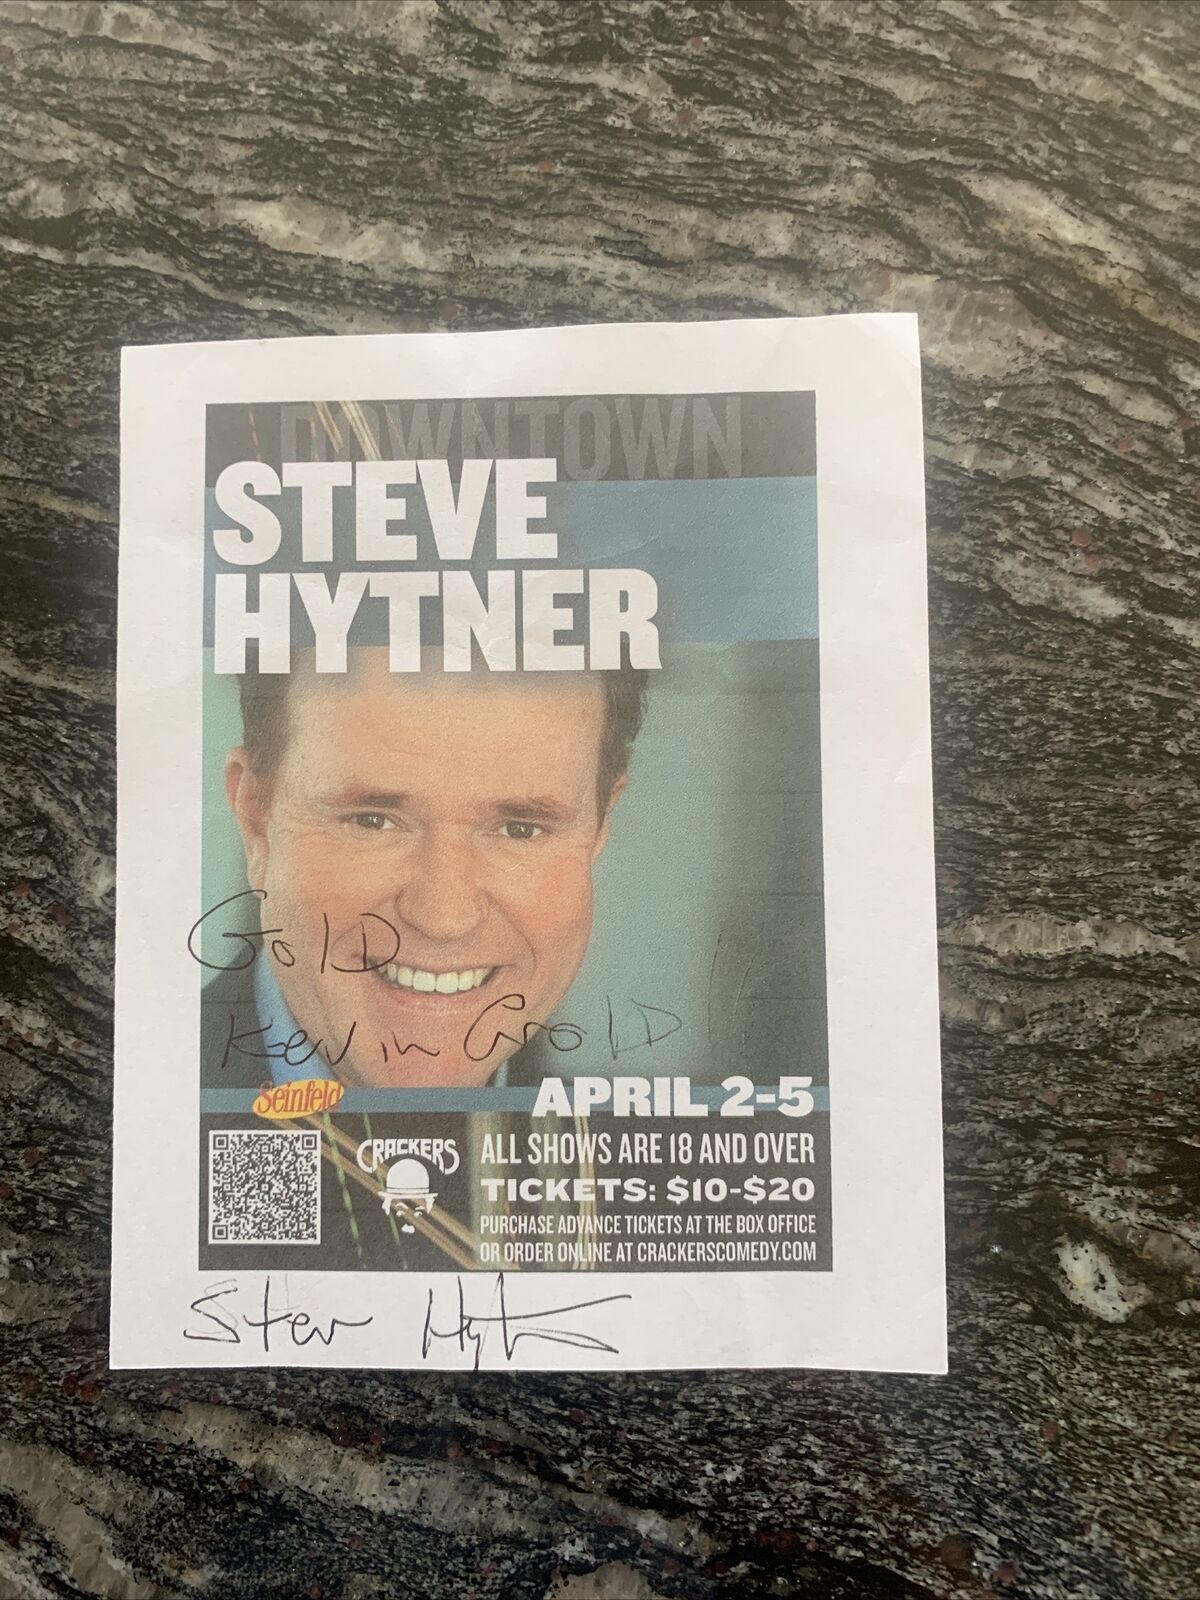 STEVE HYTNER As KENNY Hand Signed Autograph PHOTO- ACTOR - SEINFELD Inscribed